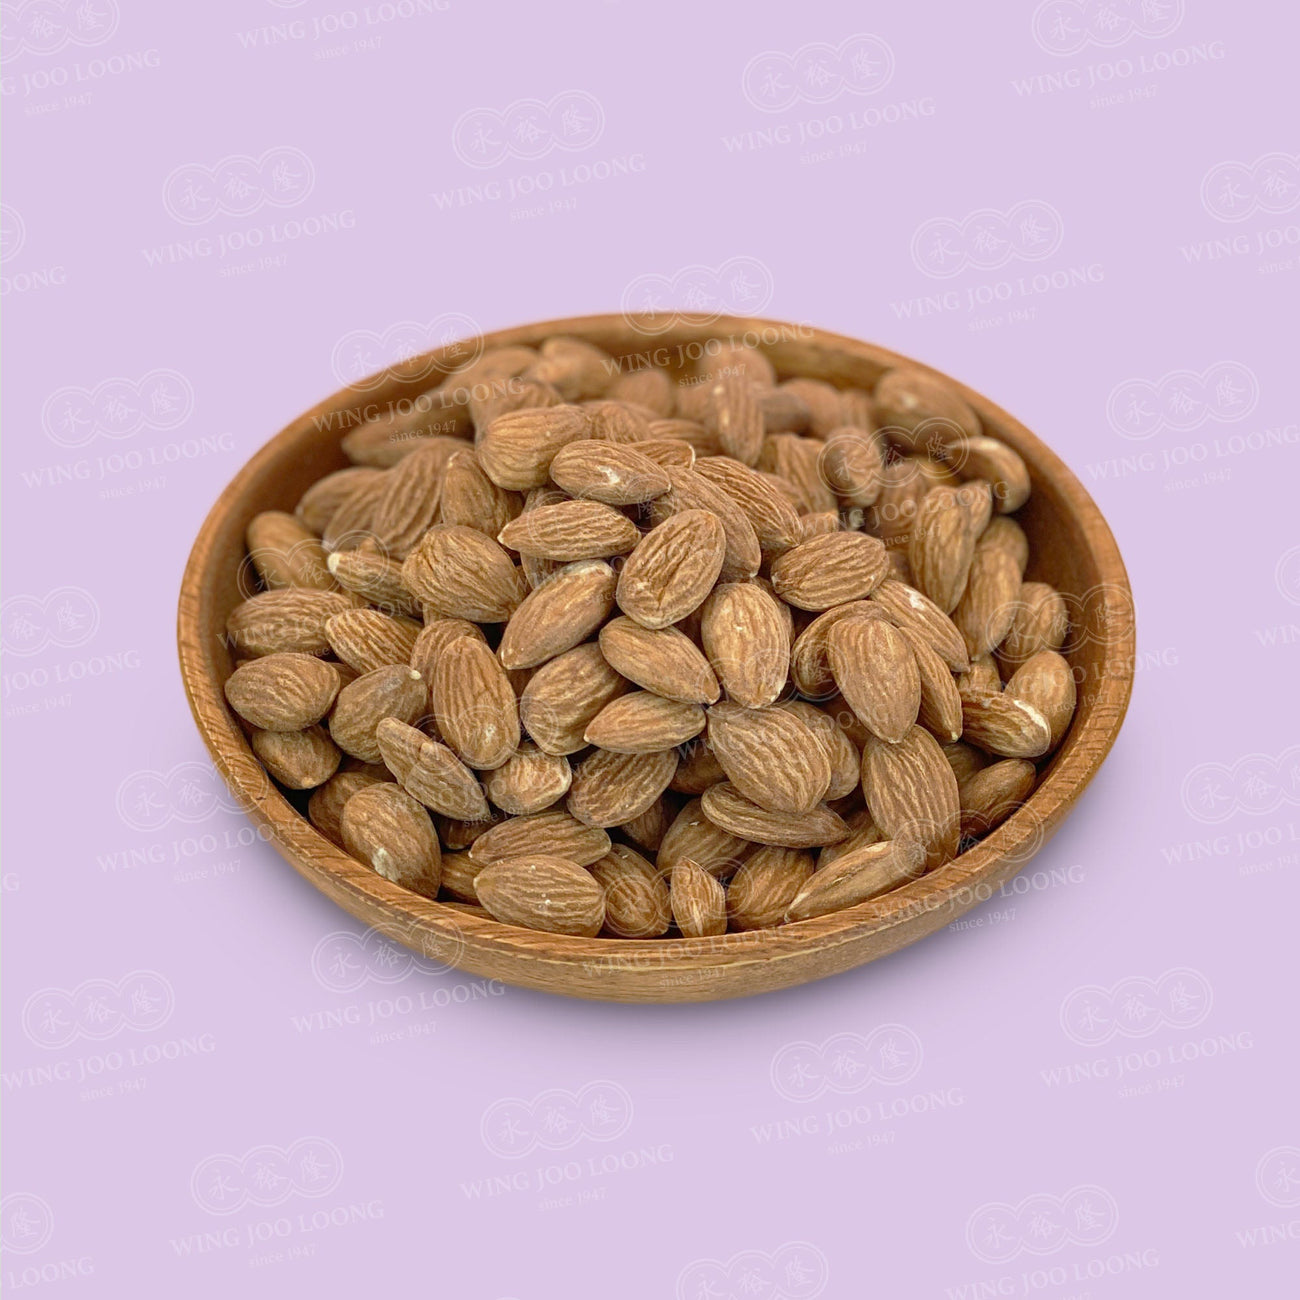 Wing Joo Loong Roasted Almonds 杏仁